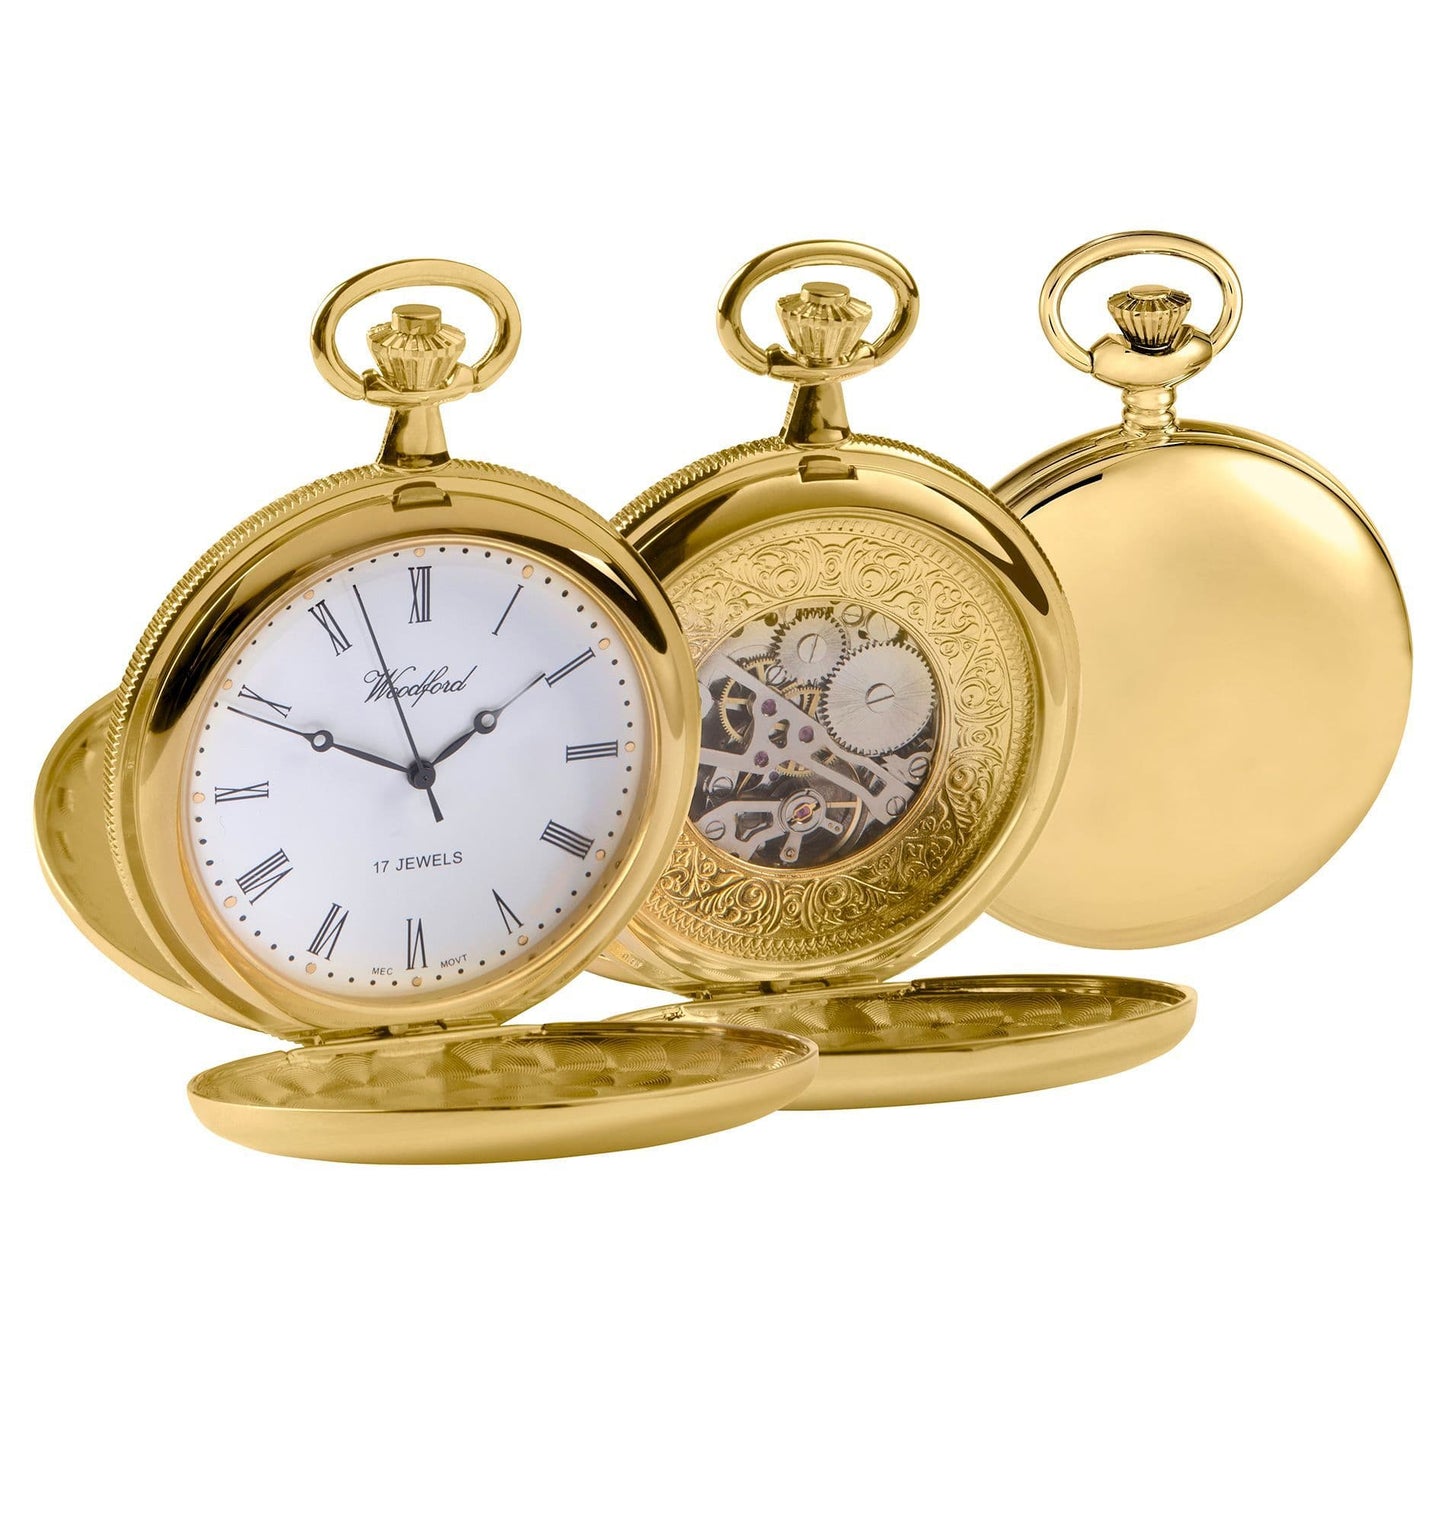 Mechanical Gold Plated Polished Pocket Watch With Chain